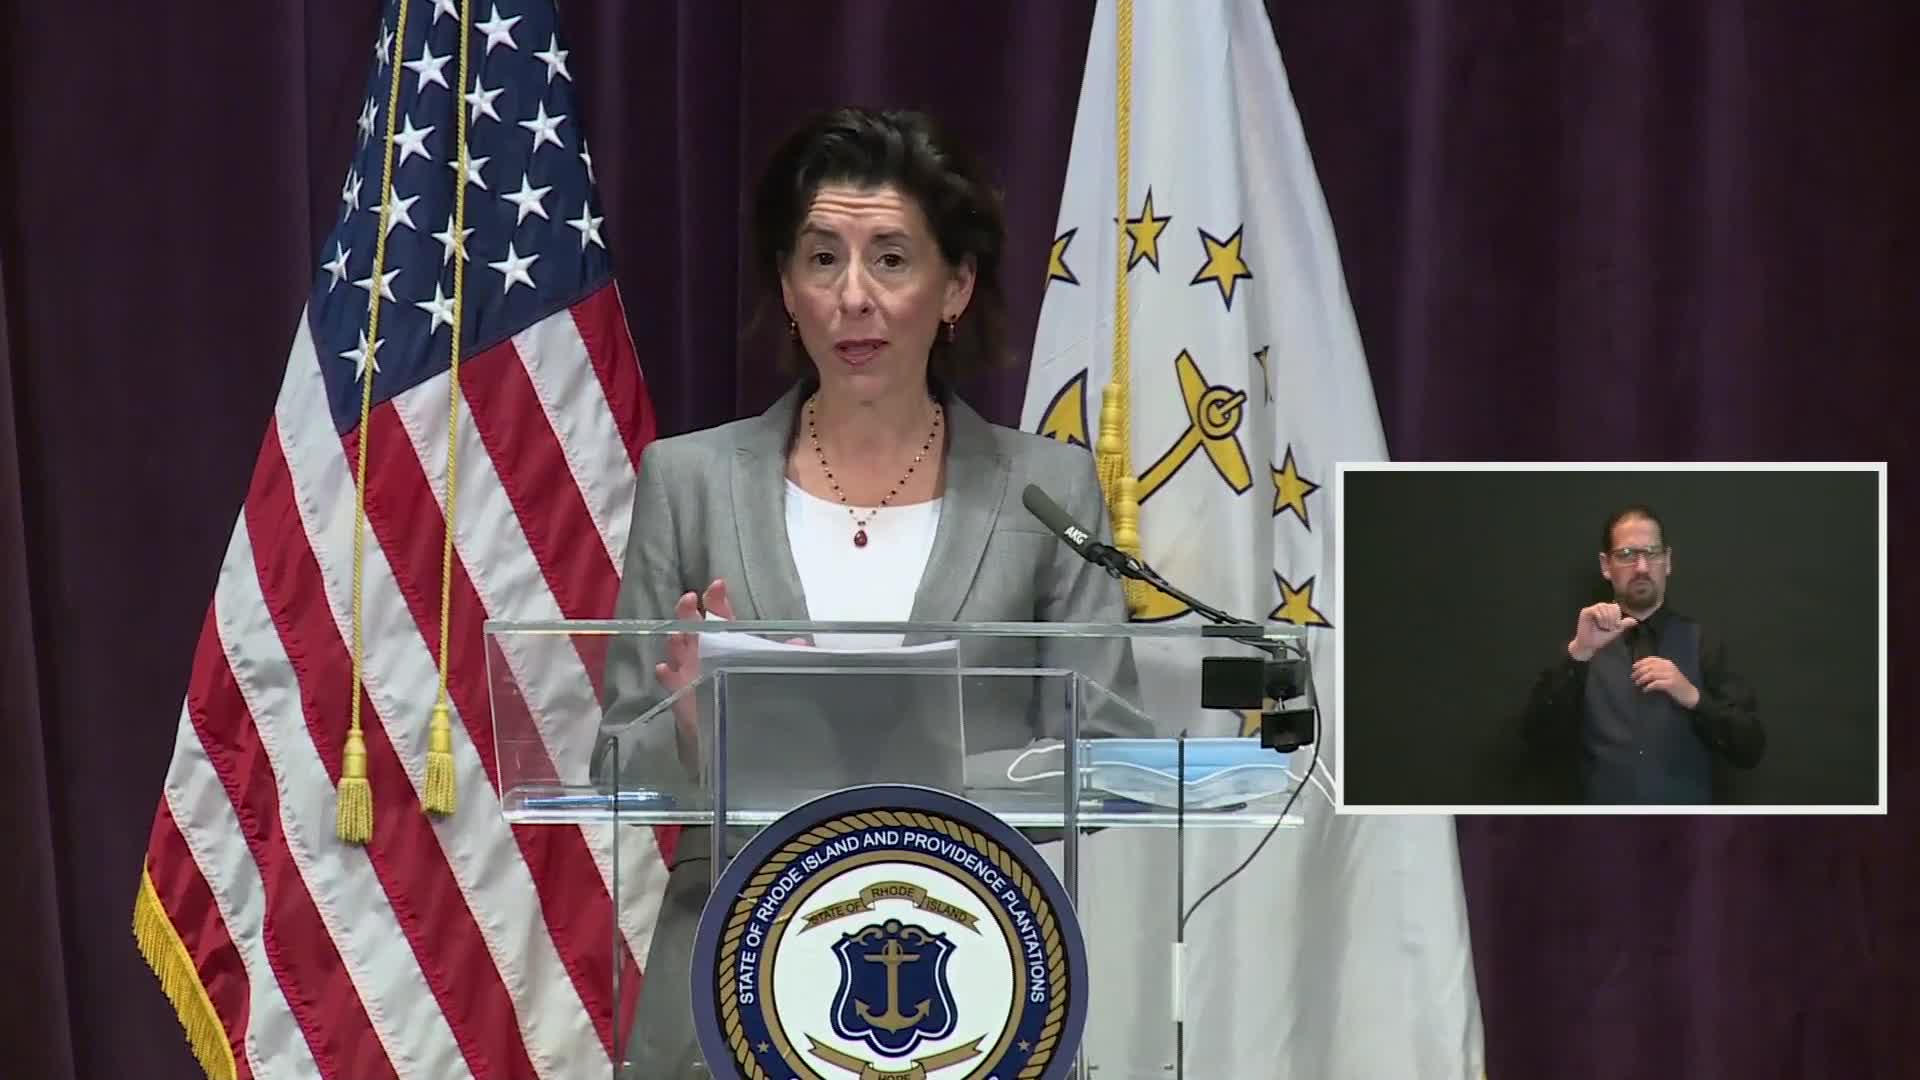 Rhode Island Gov. Gina Raimondo speaks during a press conference in Providence, Rhode Island, on May 20.